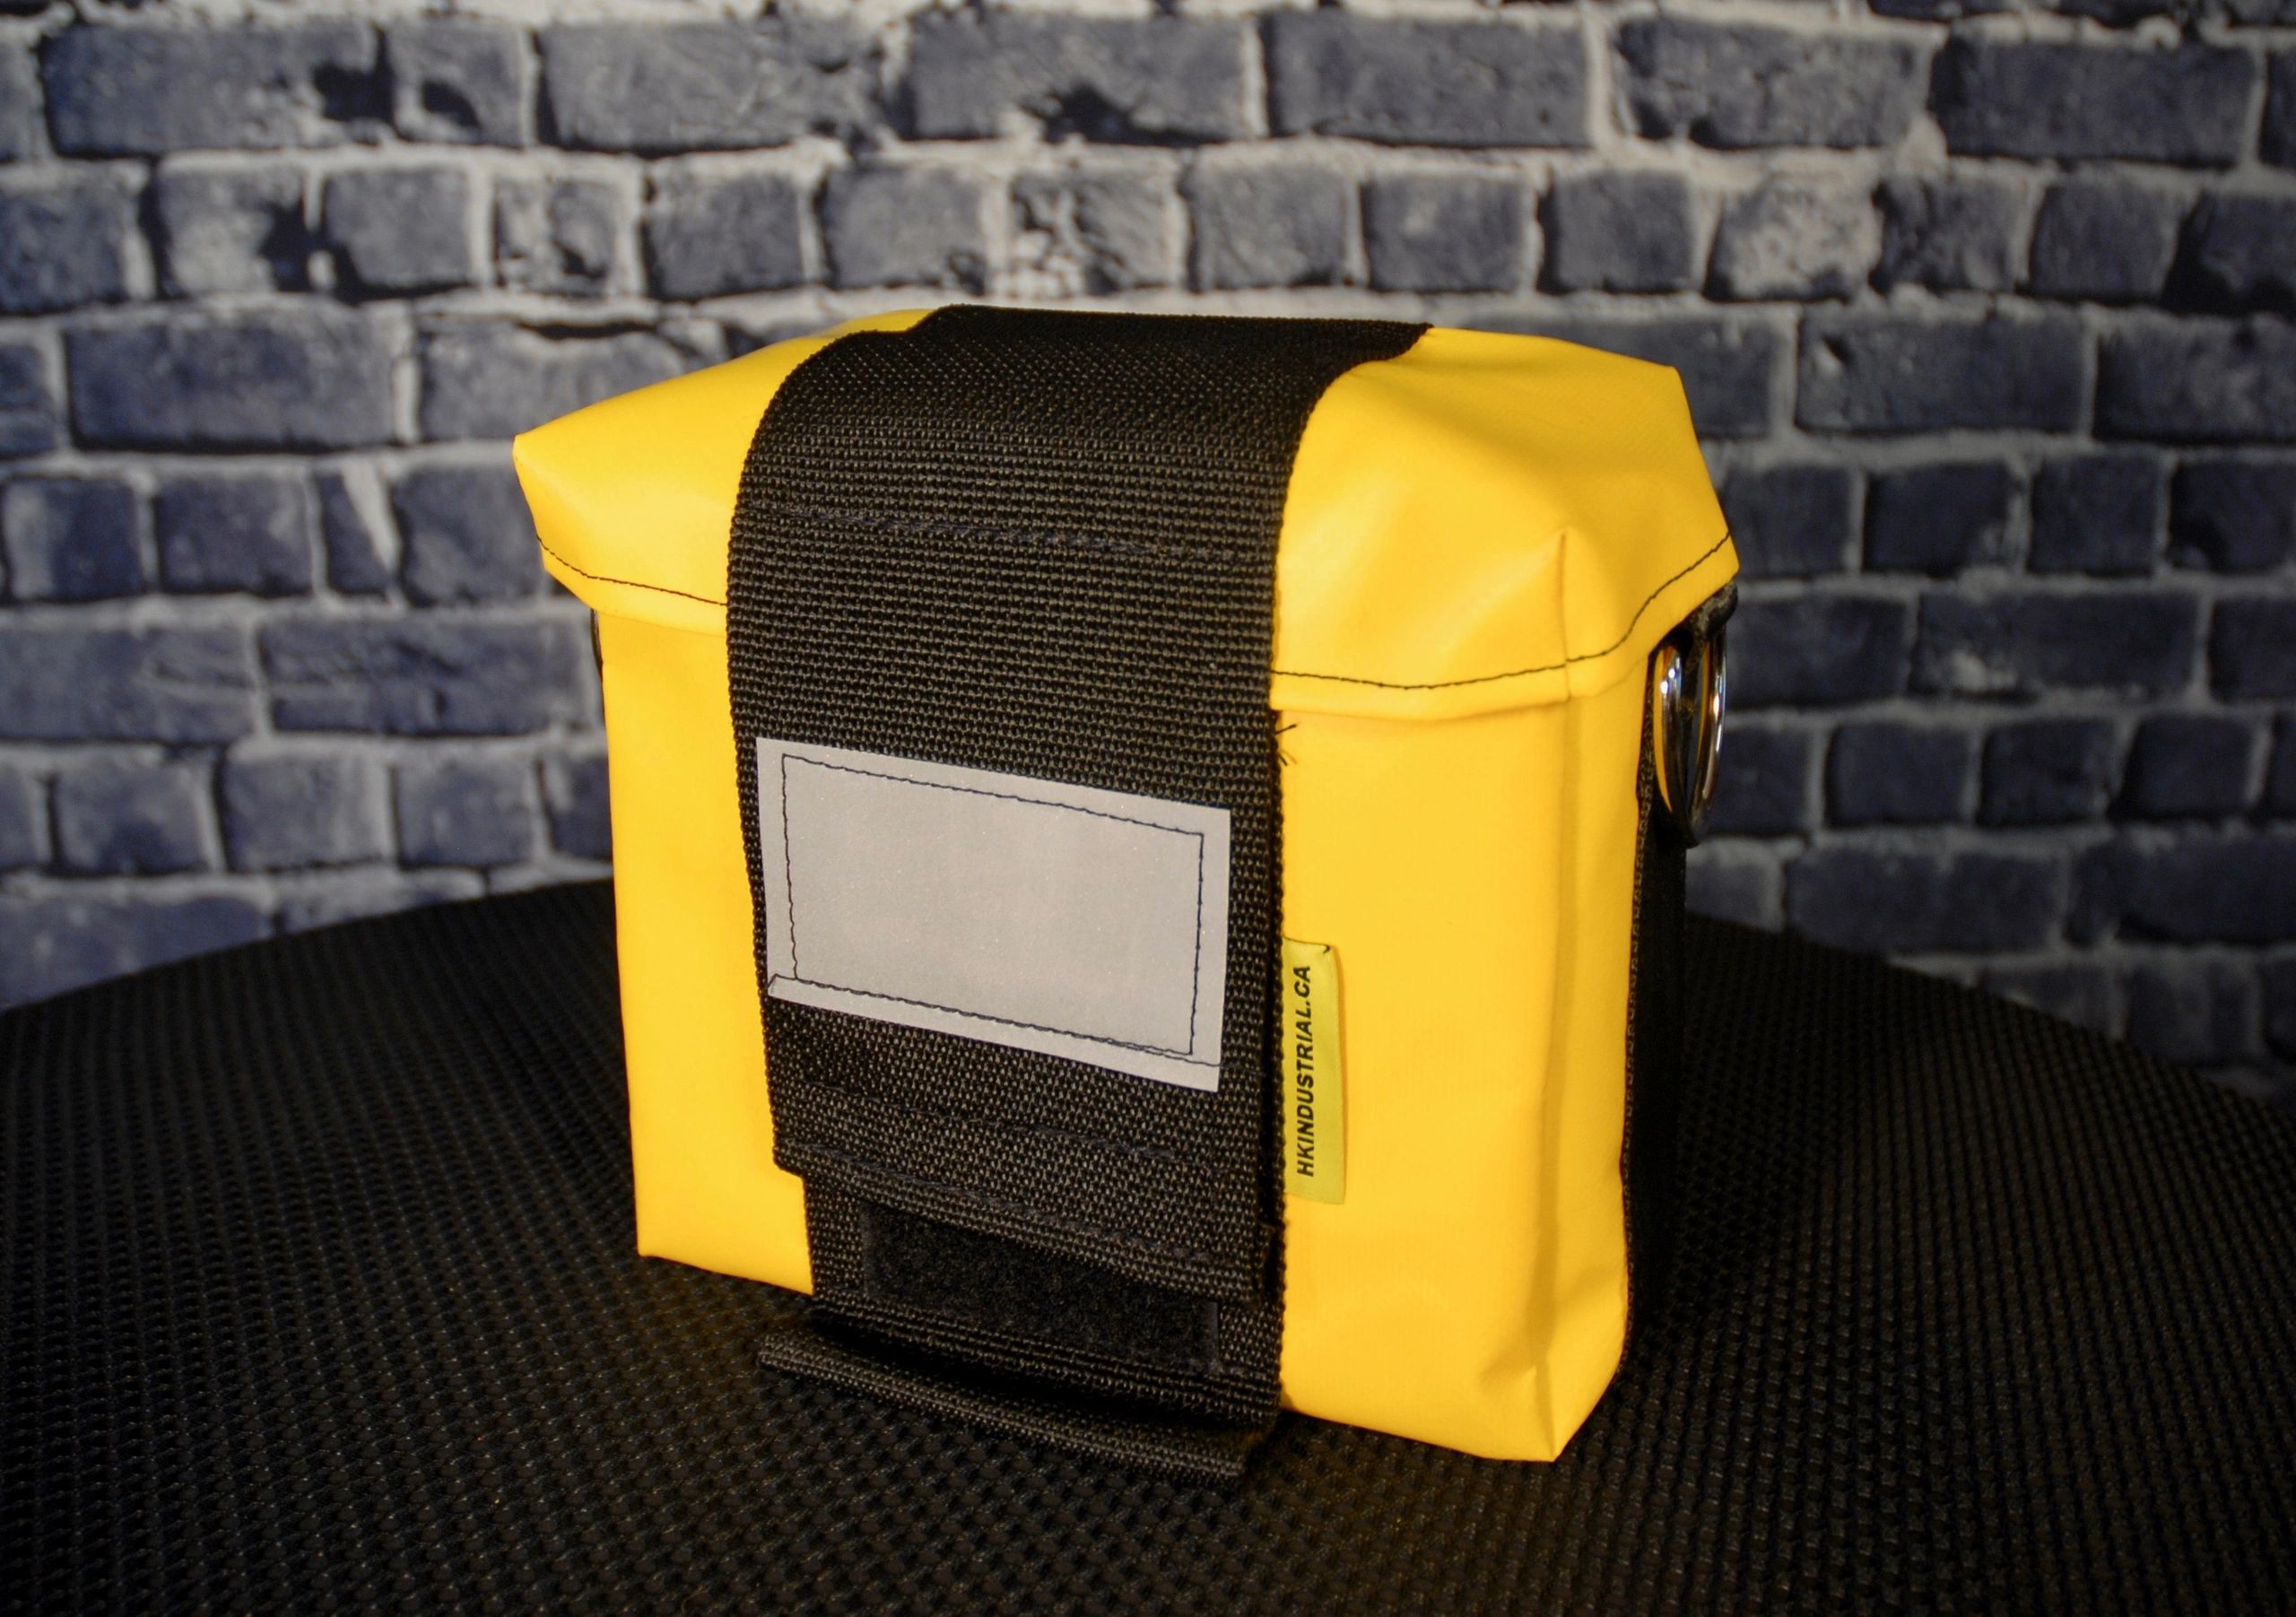 SCSR Self contained self rescuer pouch